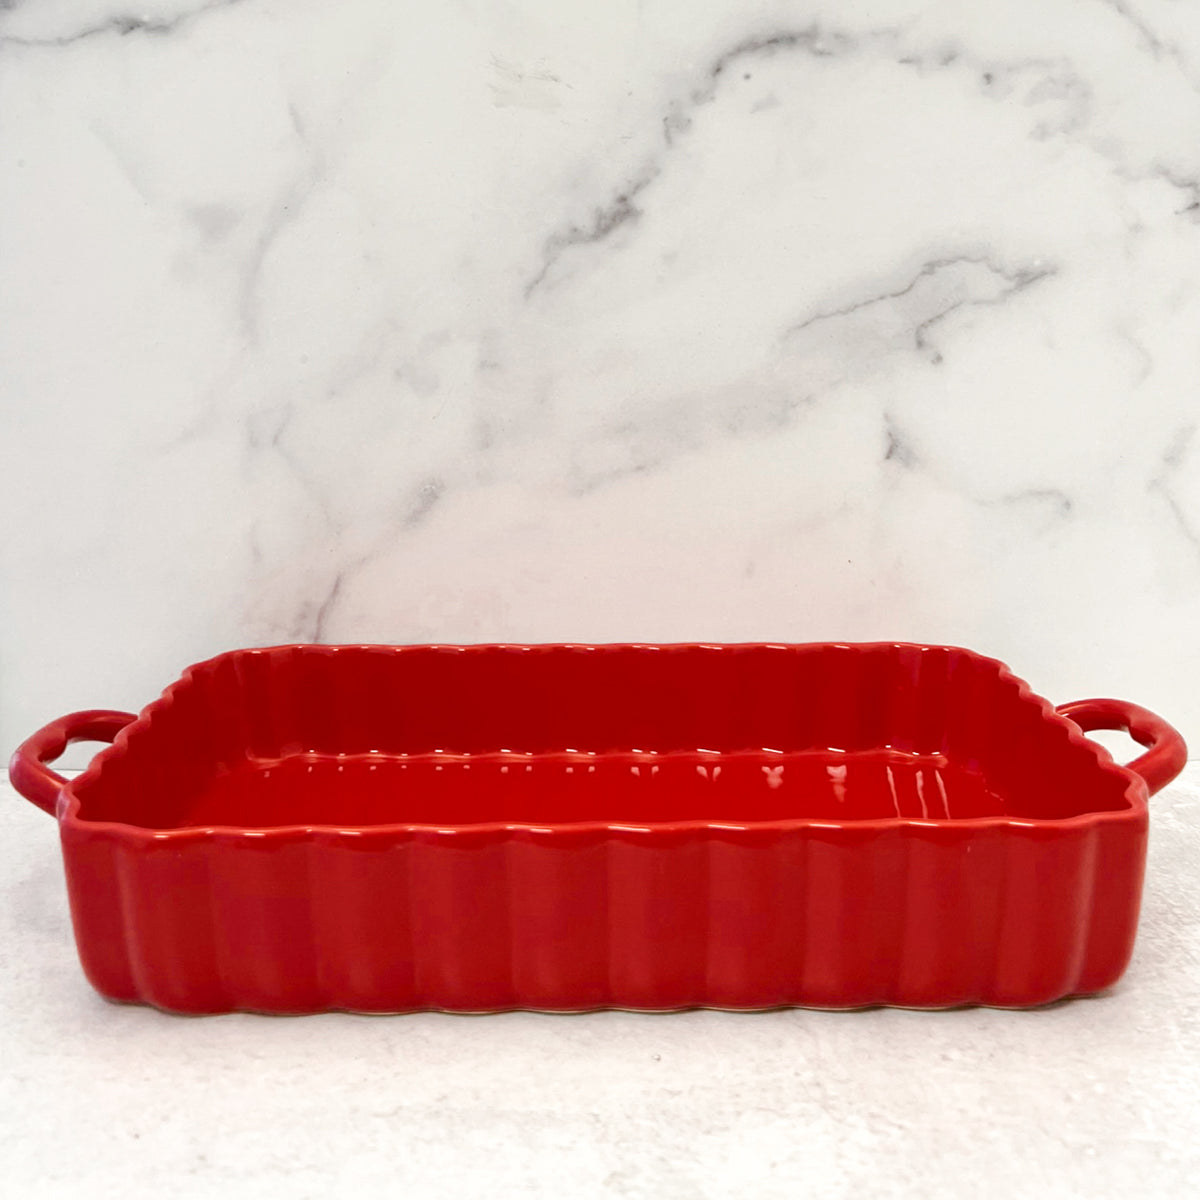 The Best 13-by-9 Casserole Dish